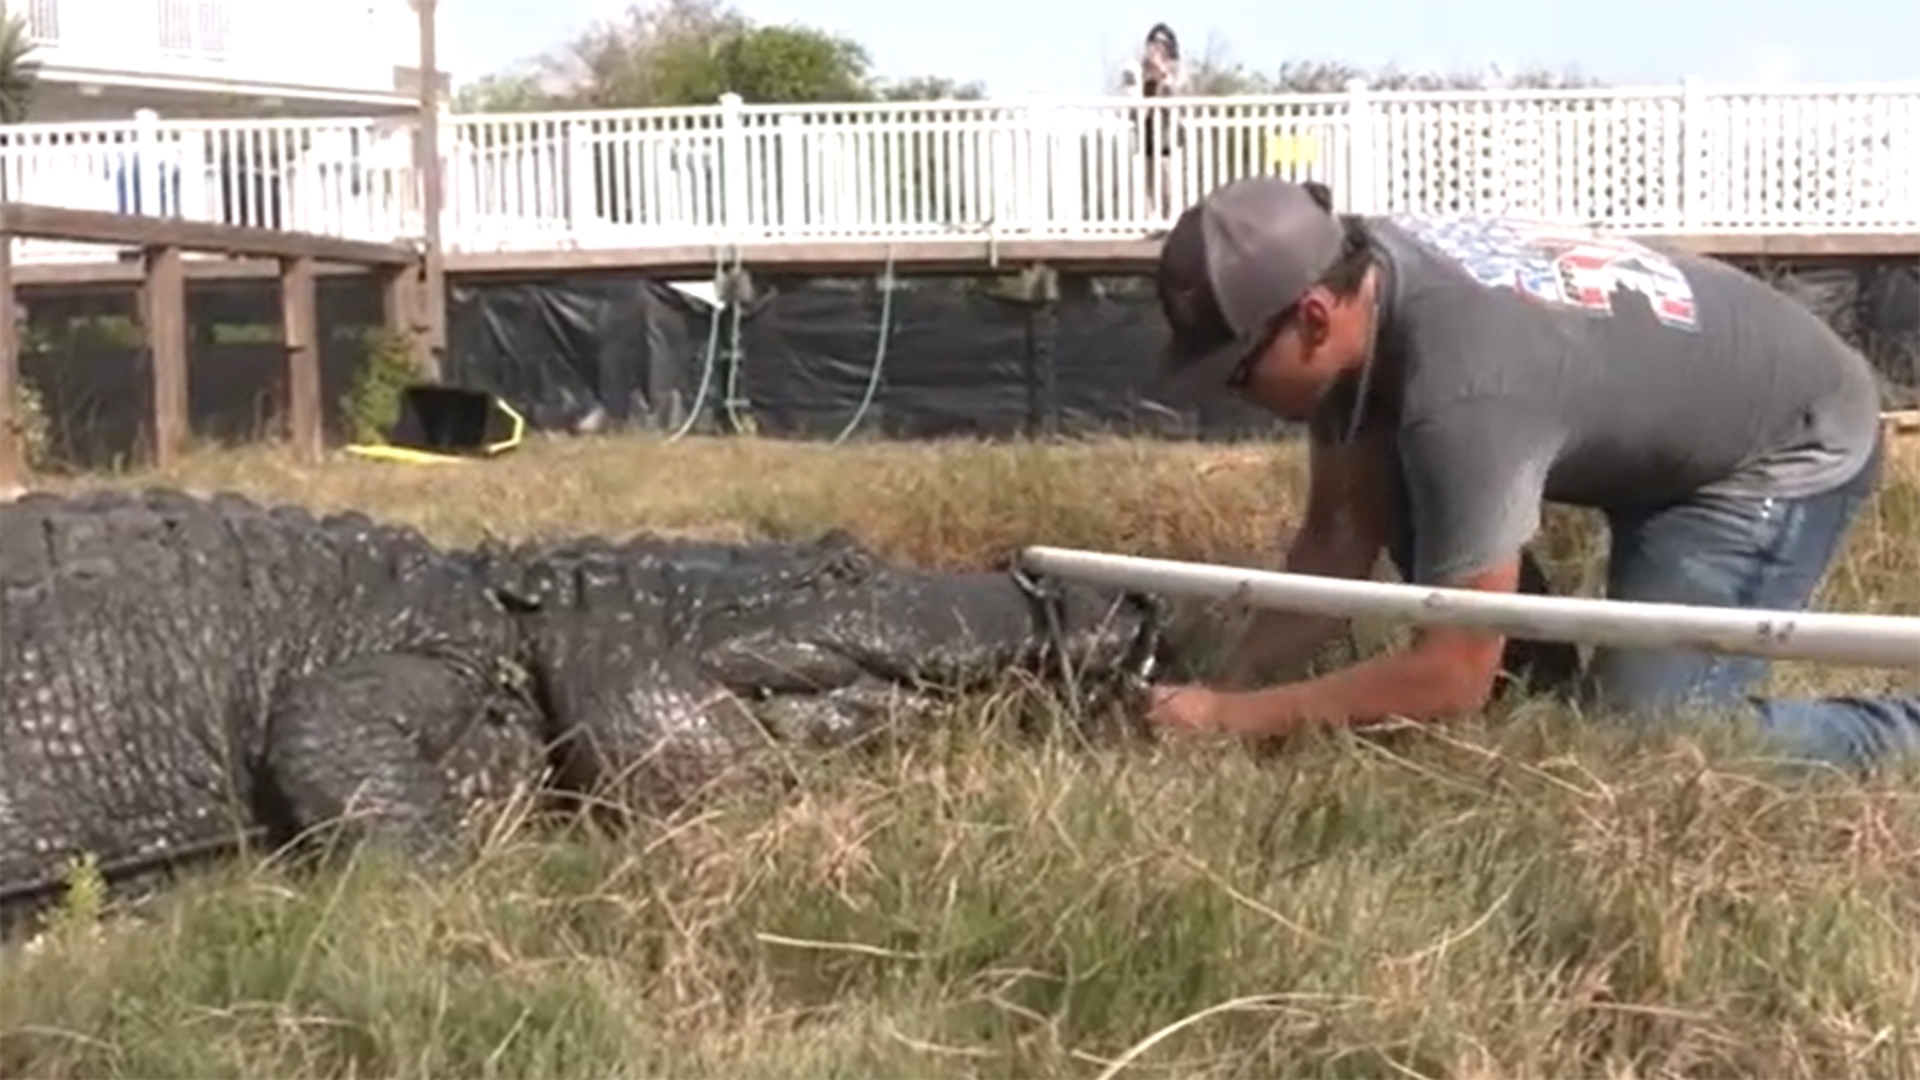 With Hurricane Beryl threatening the South Texas coast, Wranglers and volunteers moved 37 alligators from a Padre Island sanctuary to Gator Country in Beaumont.